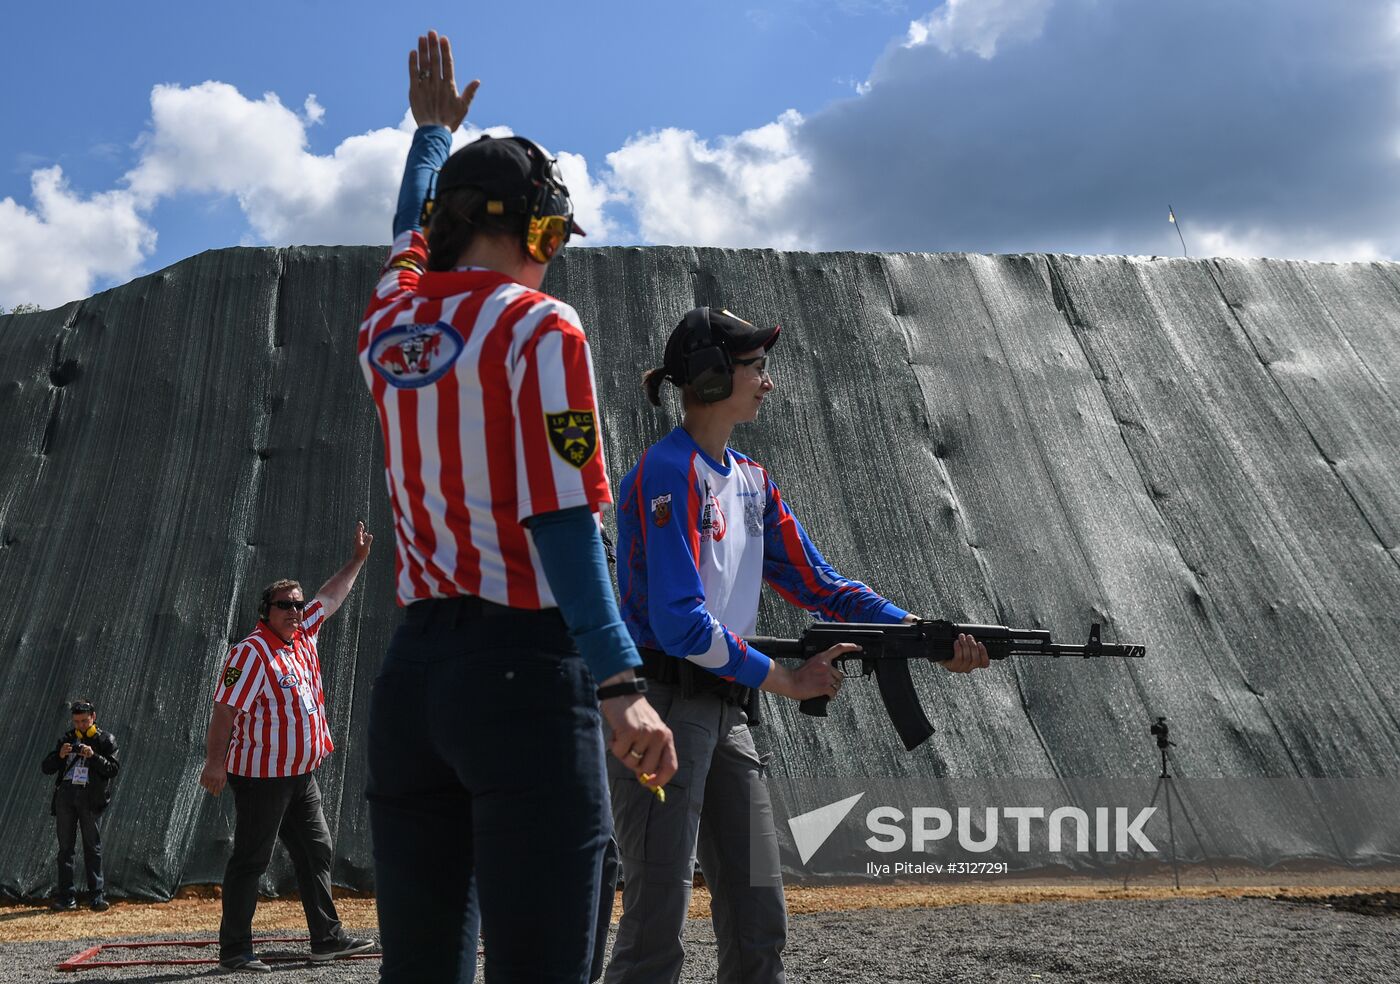 2017 IPSC Rifle World Shoot. Paired competition